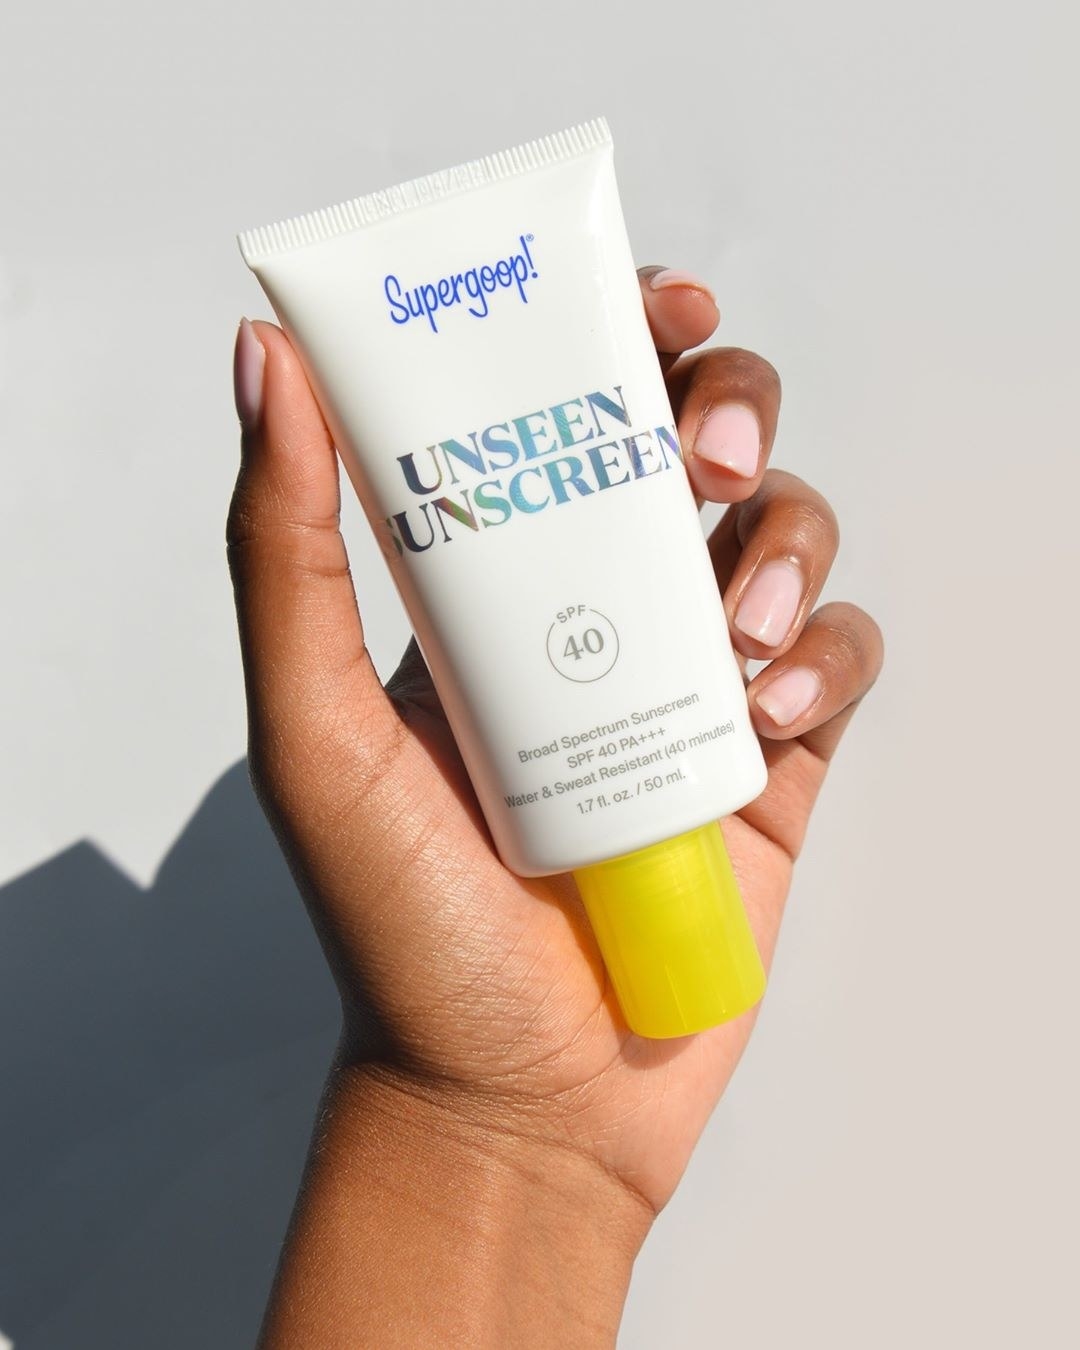 model holding white bottle of sunscreen with yellow cap